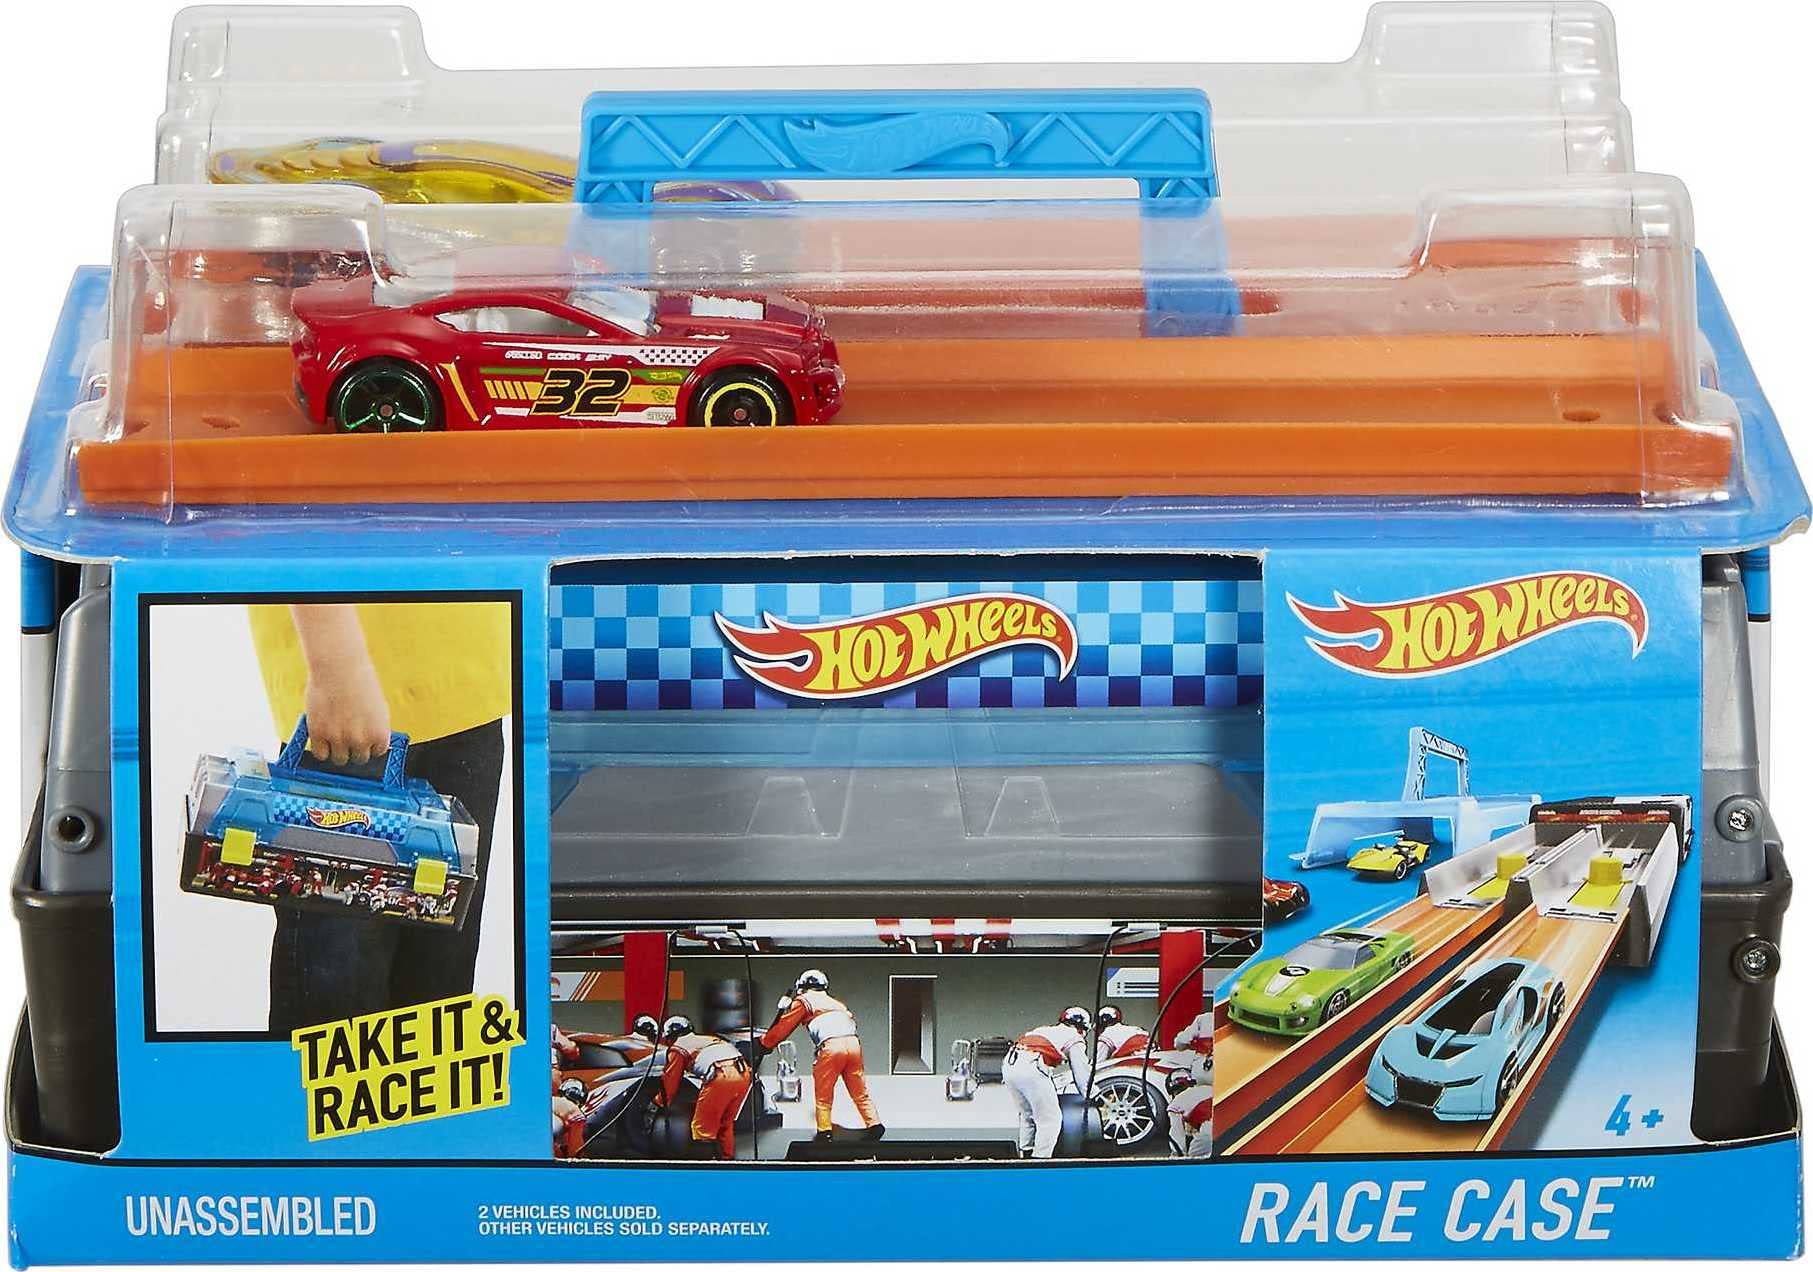 Hot Wheels Race case Track Set With 2 Hot Wheels cars, Dual Launcher For Side-By-Side Racing, Storage container, Toy For Kids 4 